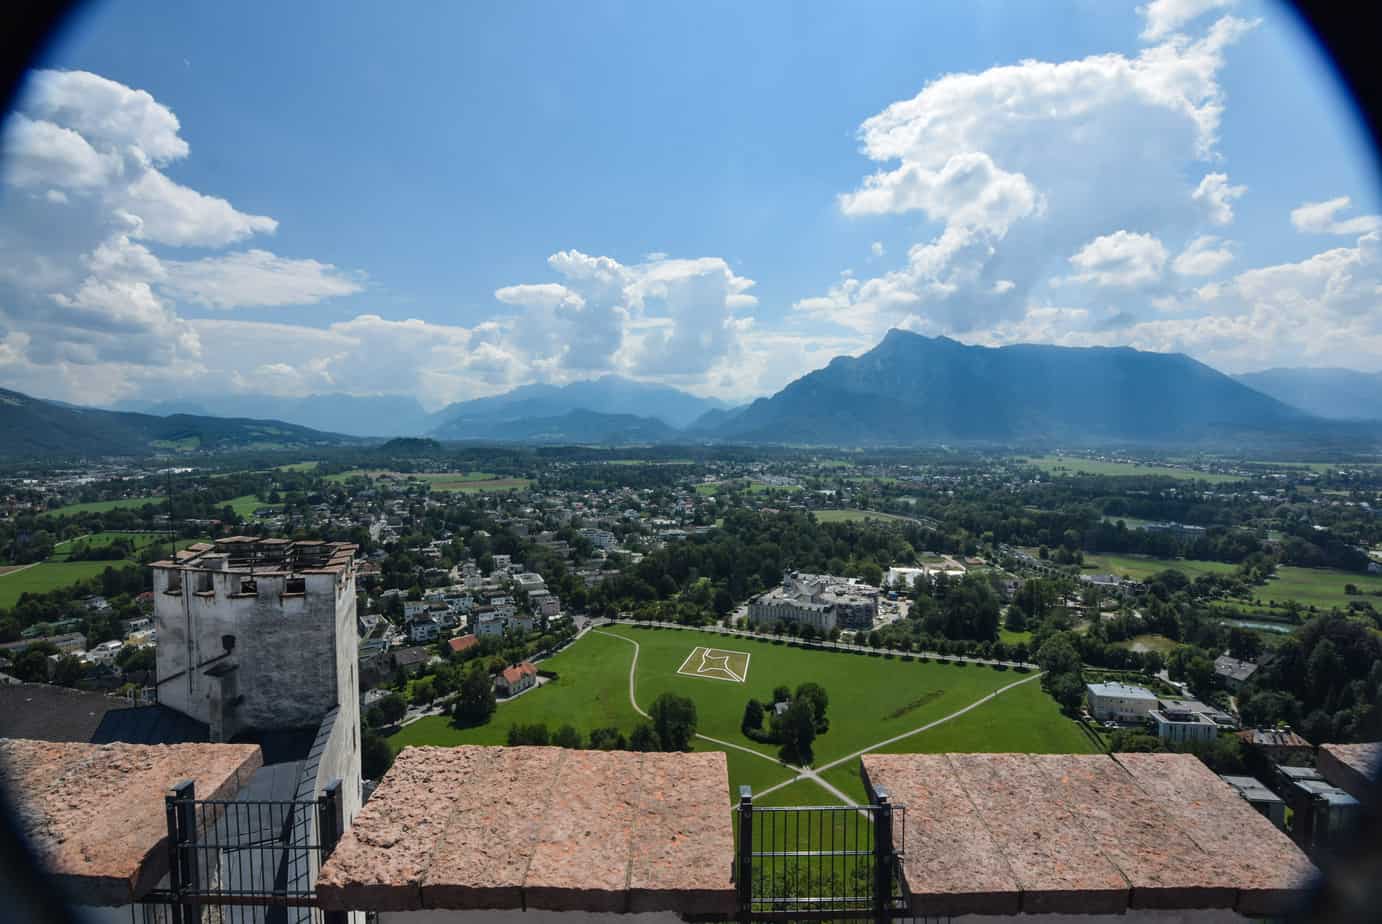 View of a town and a big green space with mountains in the background.